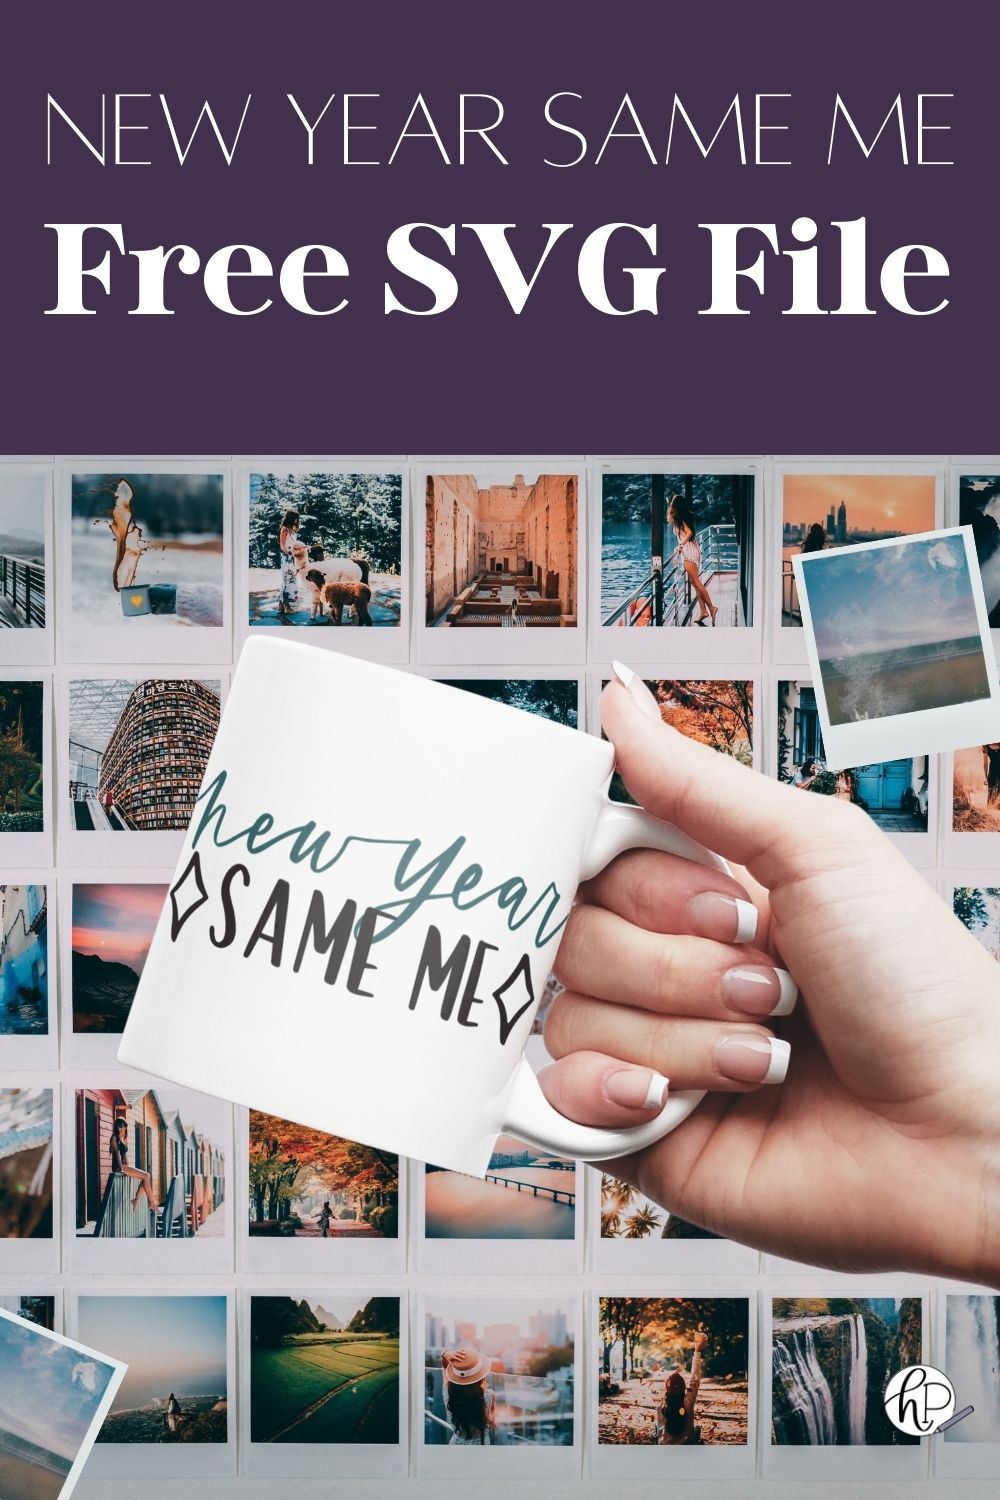 New year, same me... free svg file on mug in front of photo vision board